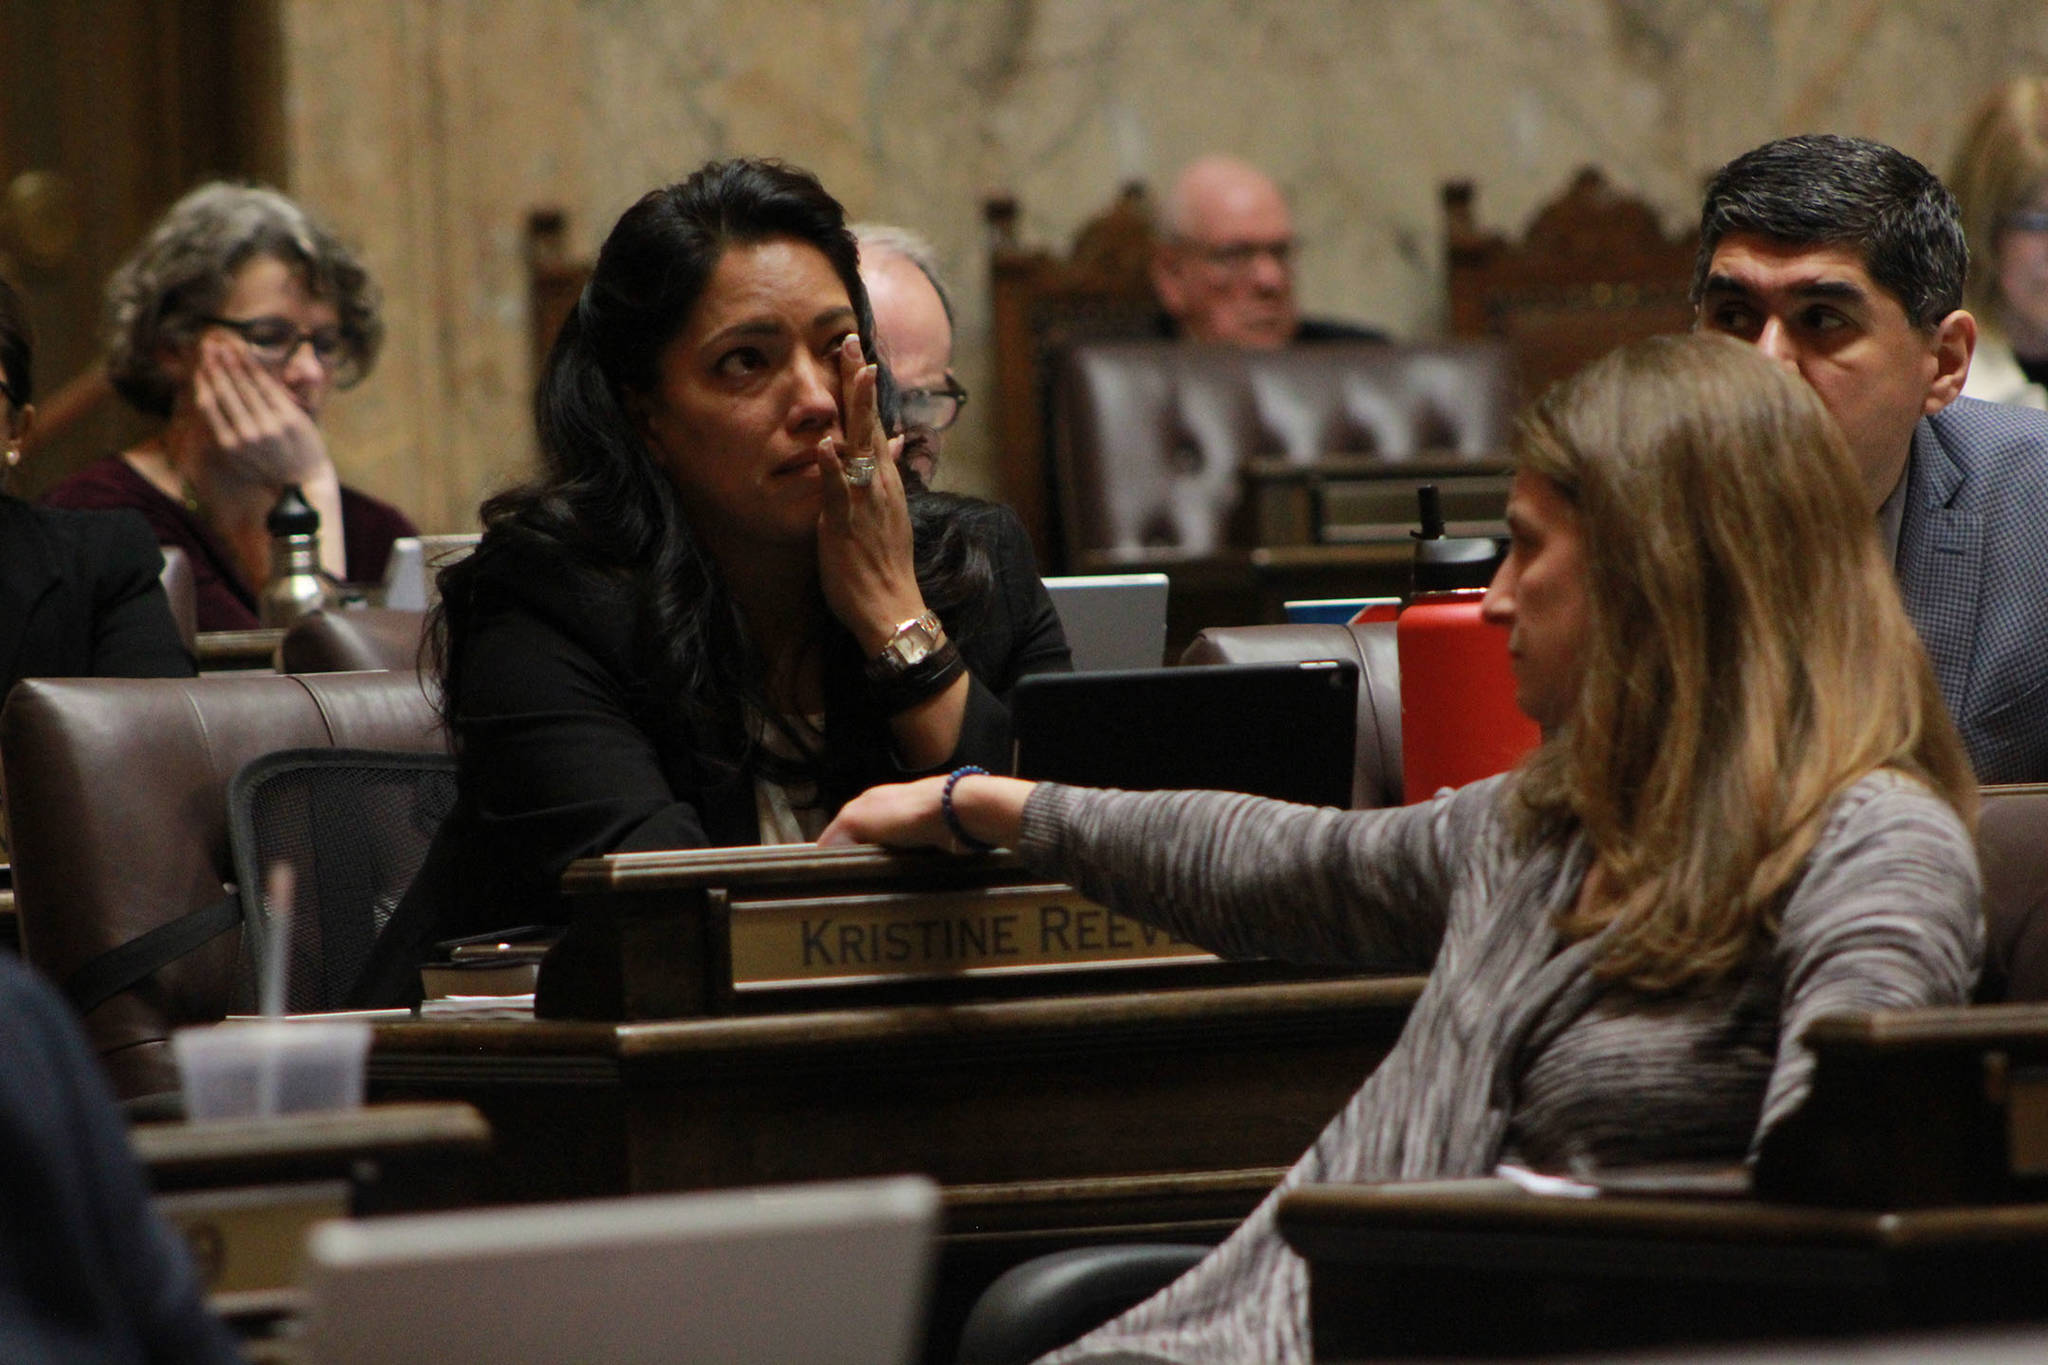 Rep. Kristine Reeves (D-Federal Way) battled tears during the House floor debate on a bill to ban bump stocks, while her colleague Rep. Tana Senn (D- Mercer Island) turned to comfort her. Photo by Taylor McAvoy